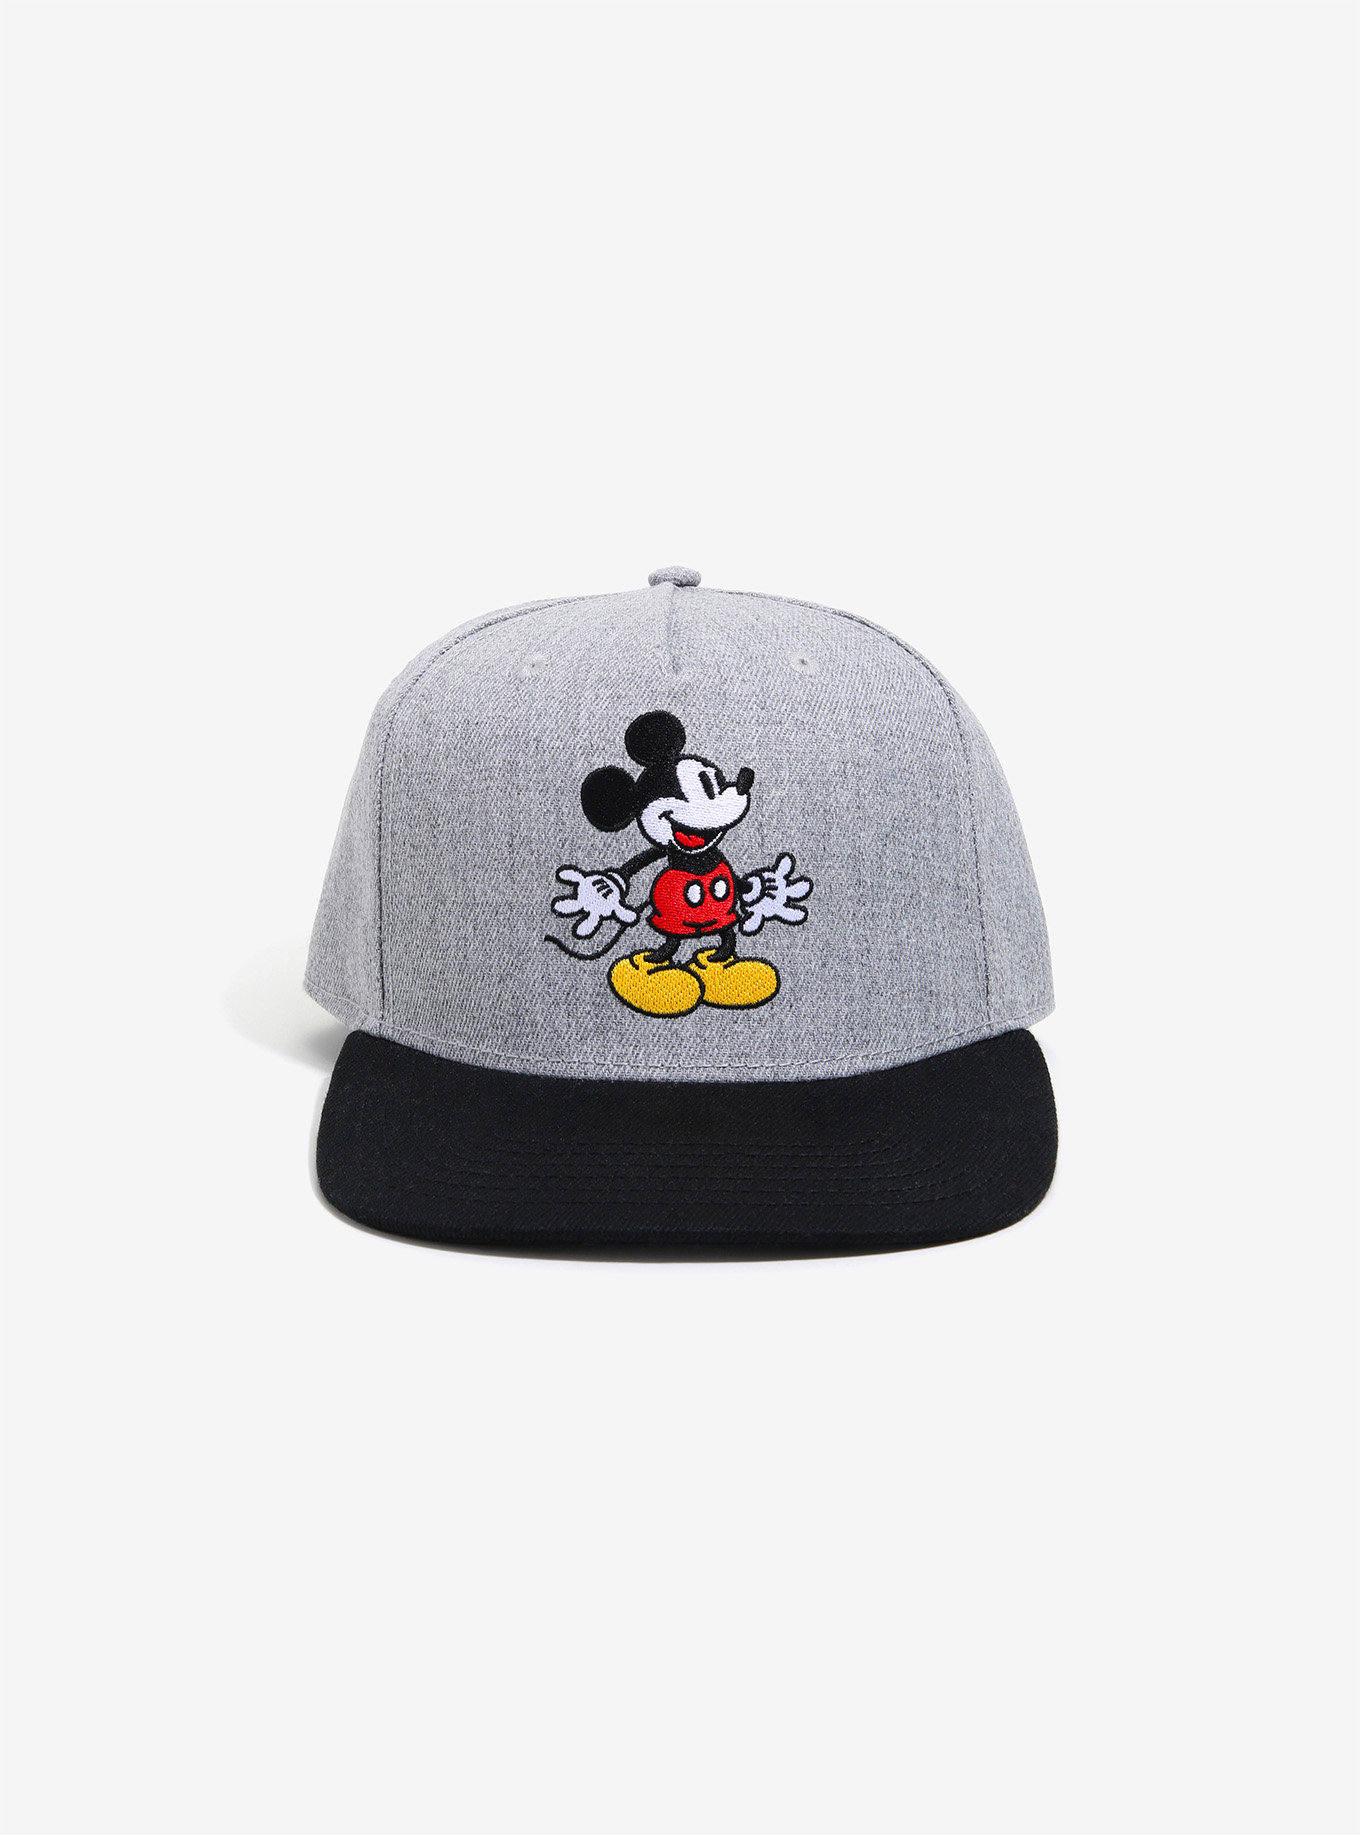 mickey mouse hat.jpg